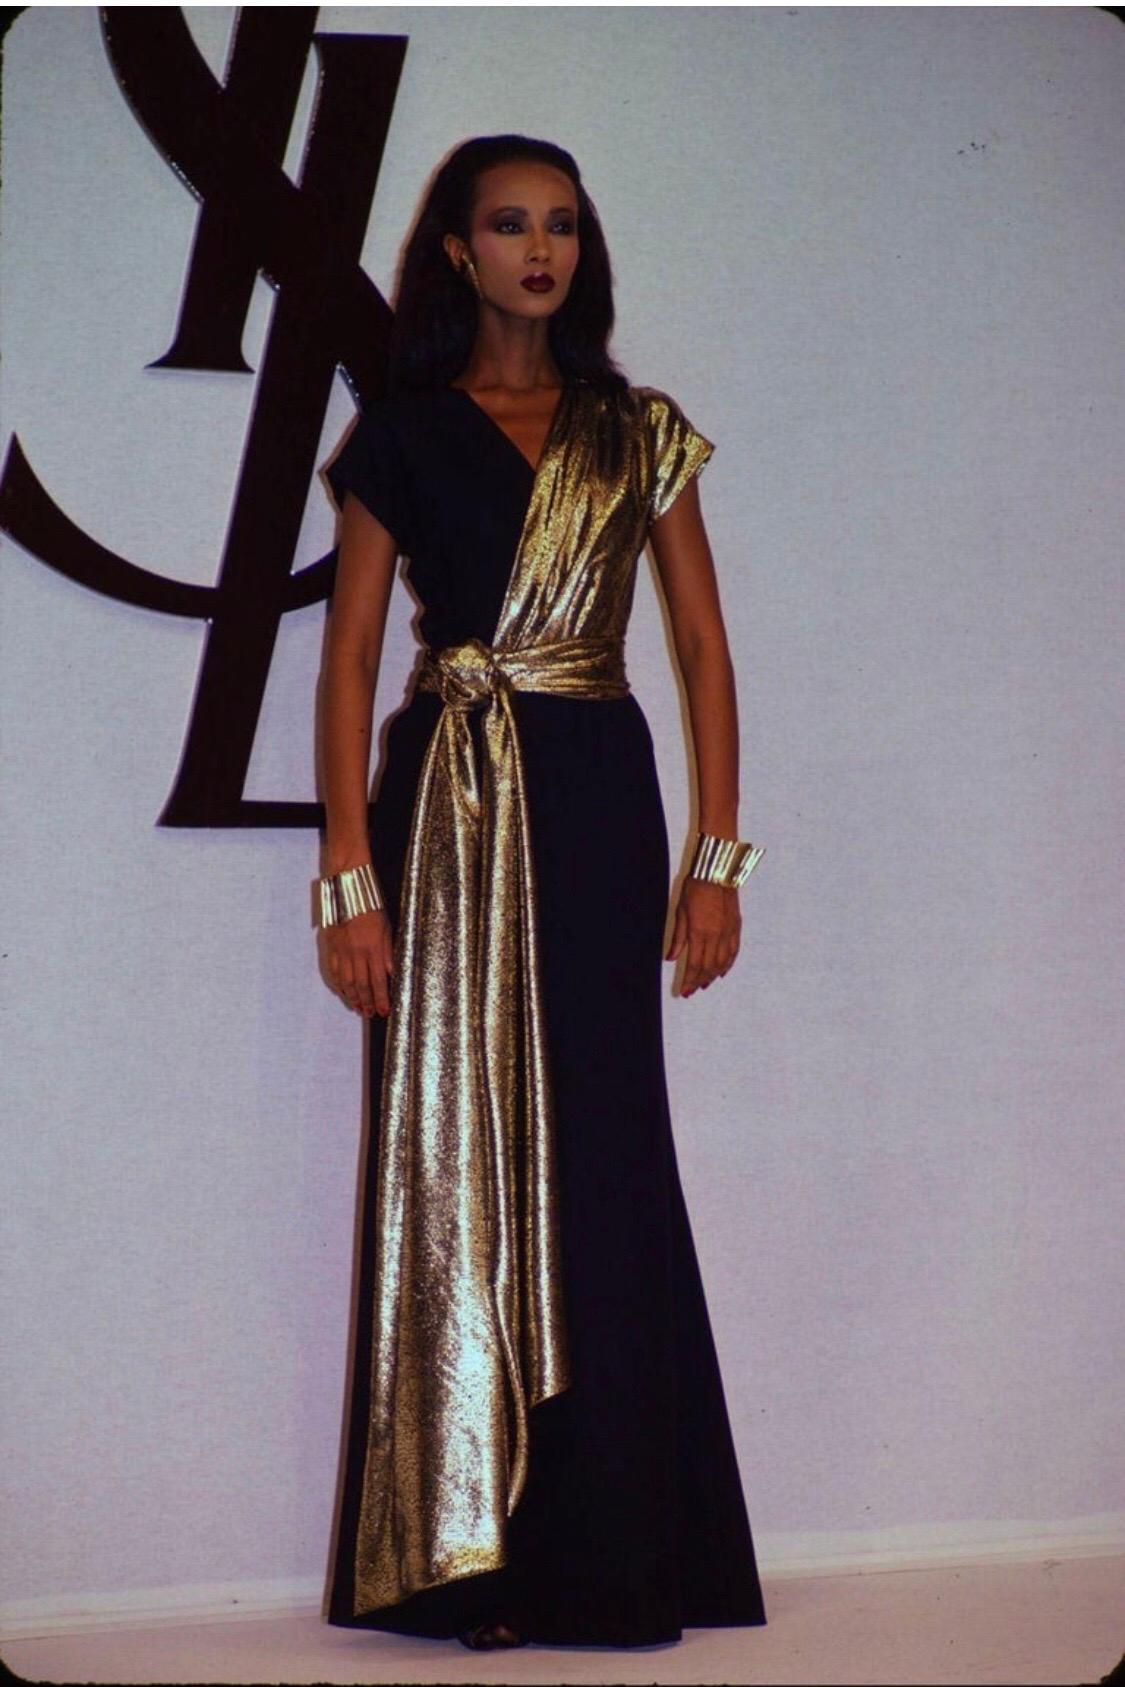 Filled with glitz, glamour, and gold, the 1980s was an era of vivacity and energy, and as usual, Yves Saint Laurent was able to capture the moment and channel it into effortlessly elegant garments. From his Fall/Winter 1986 collection this two-toned